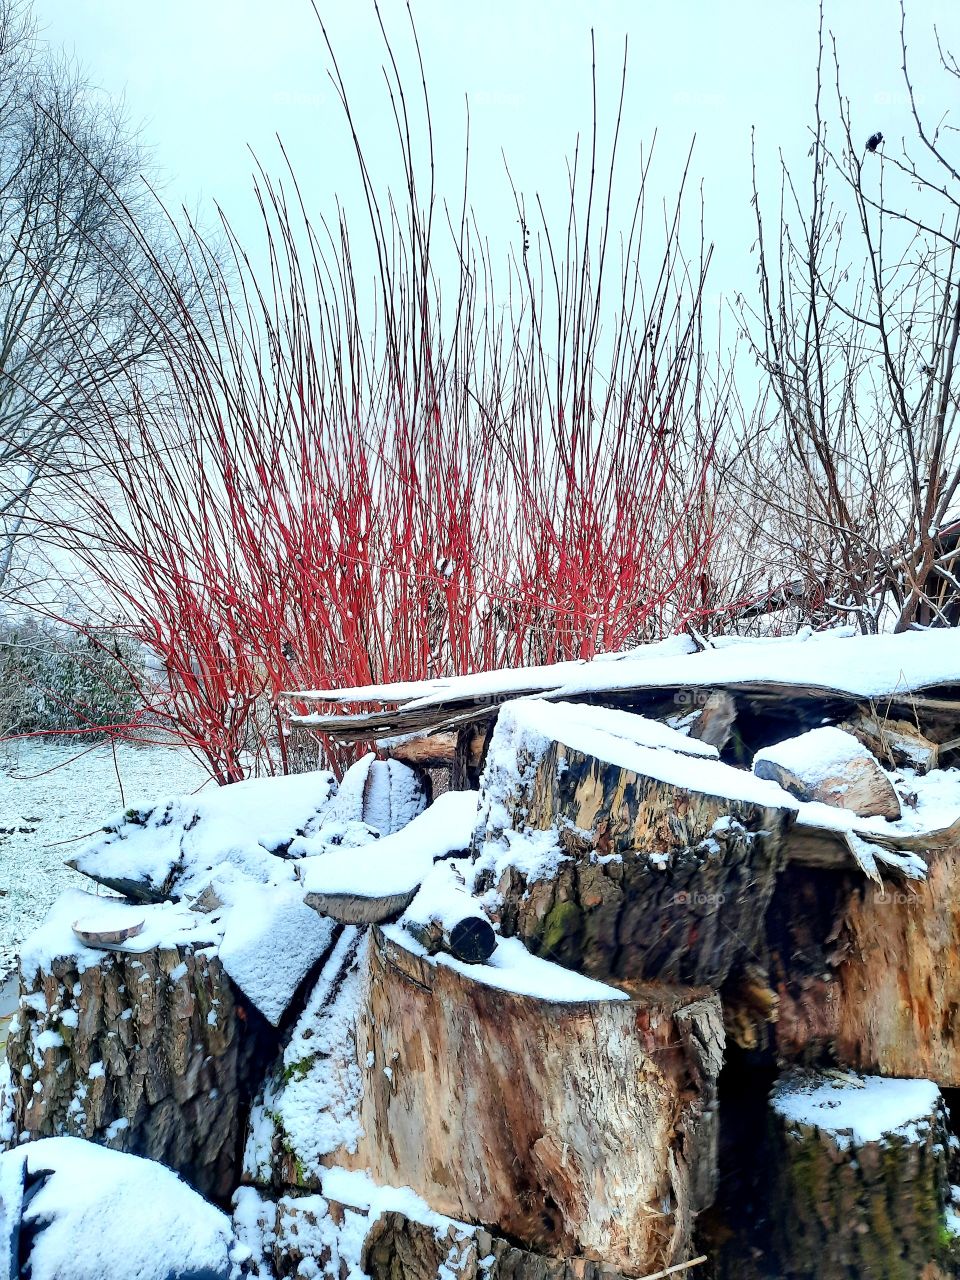 winter nature  - snow on cut trunks of trees with red dogwood branches in the background